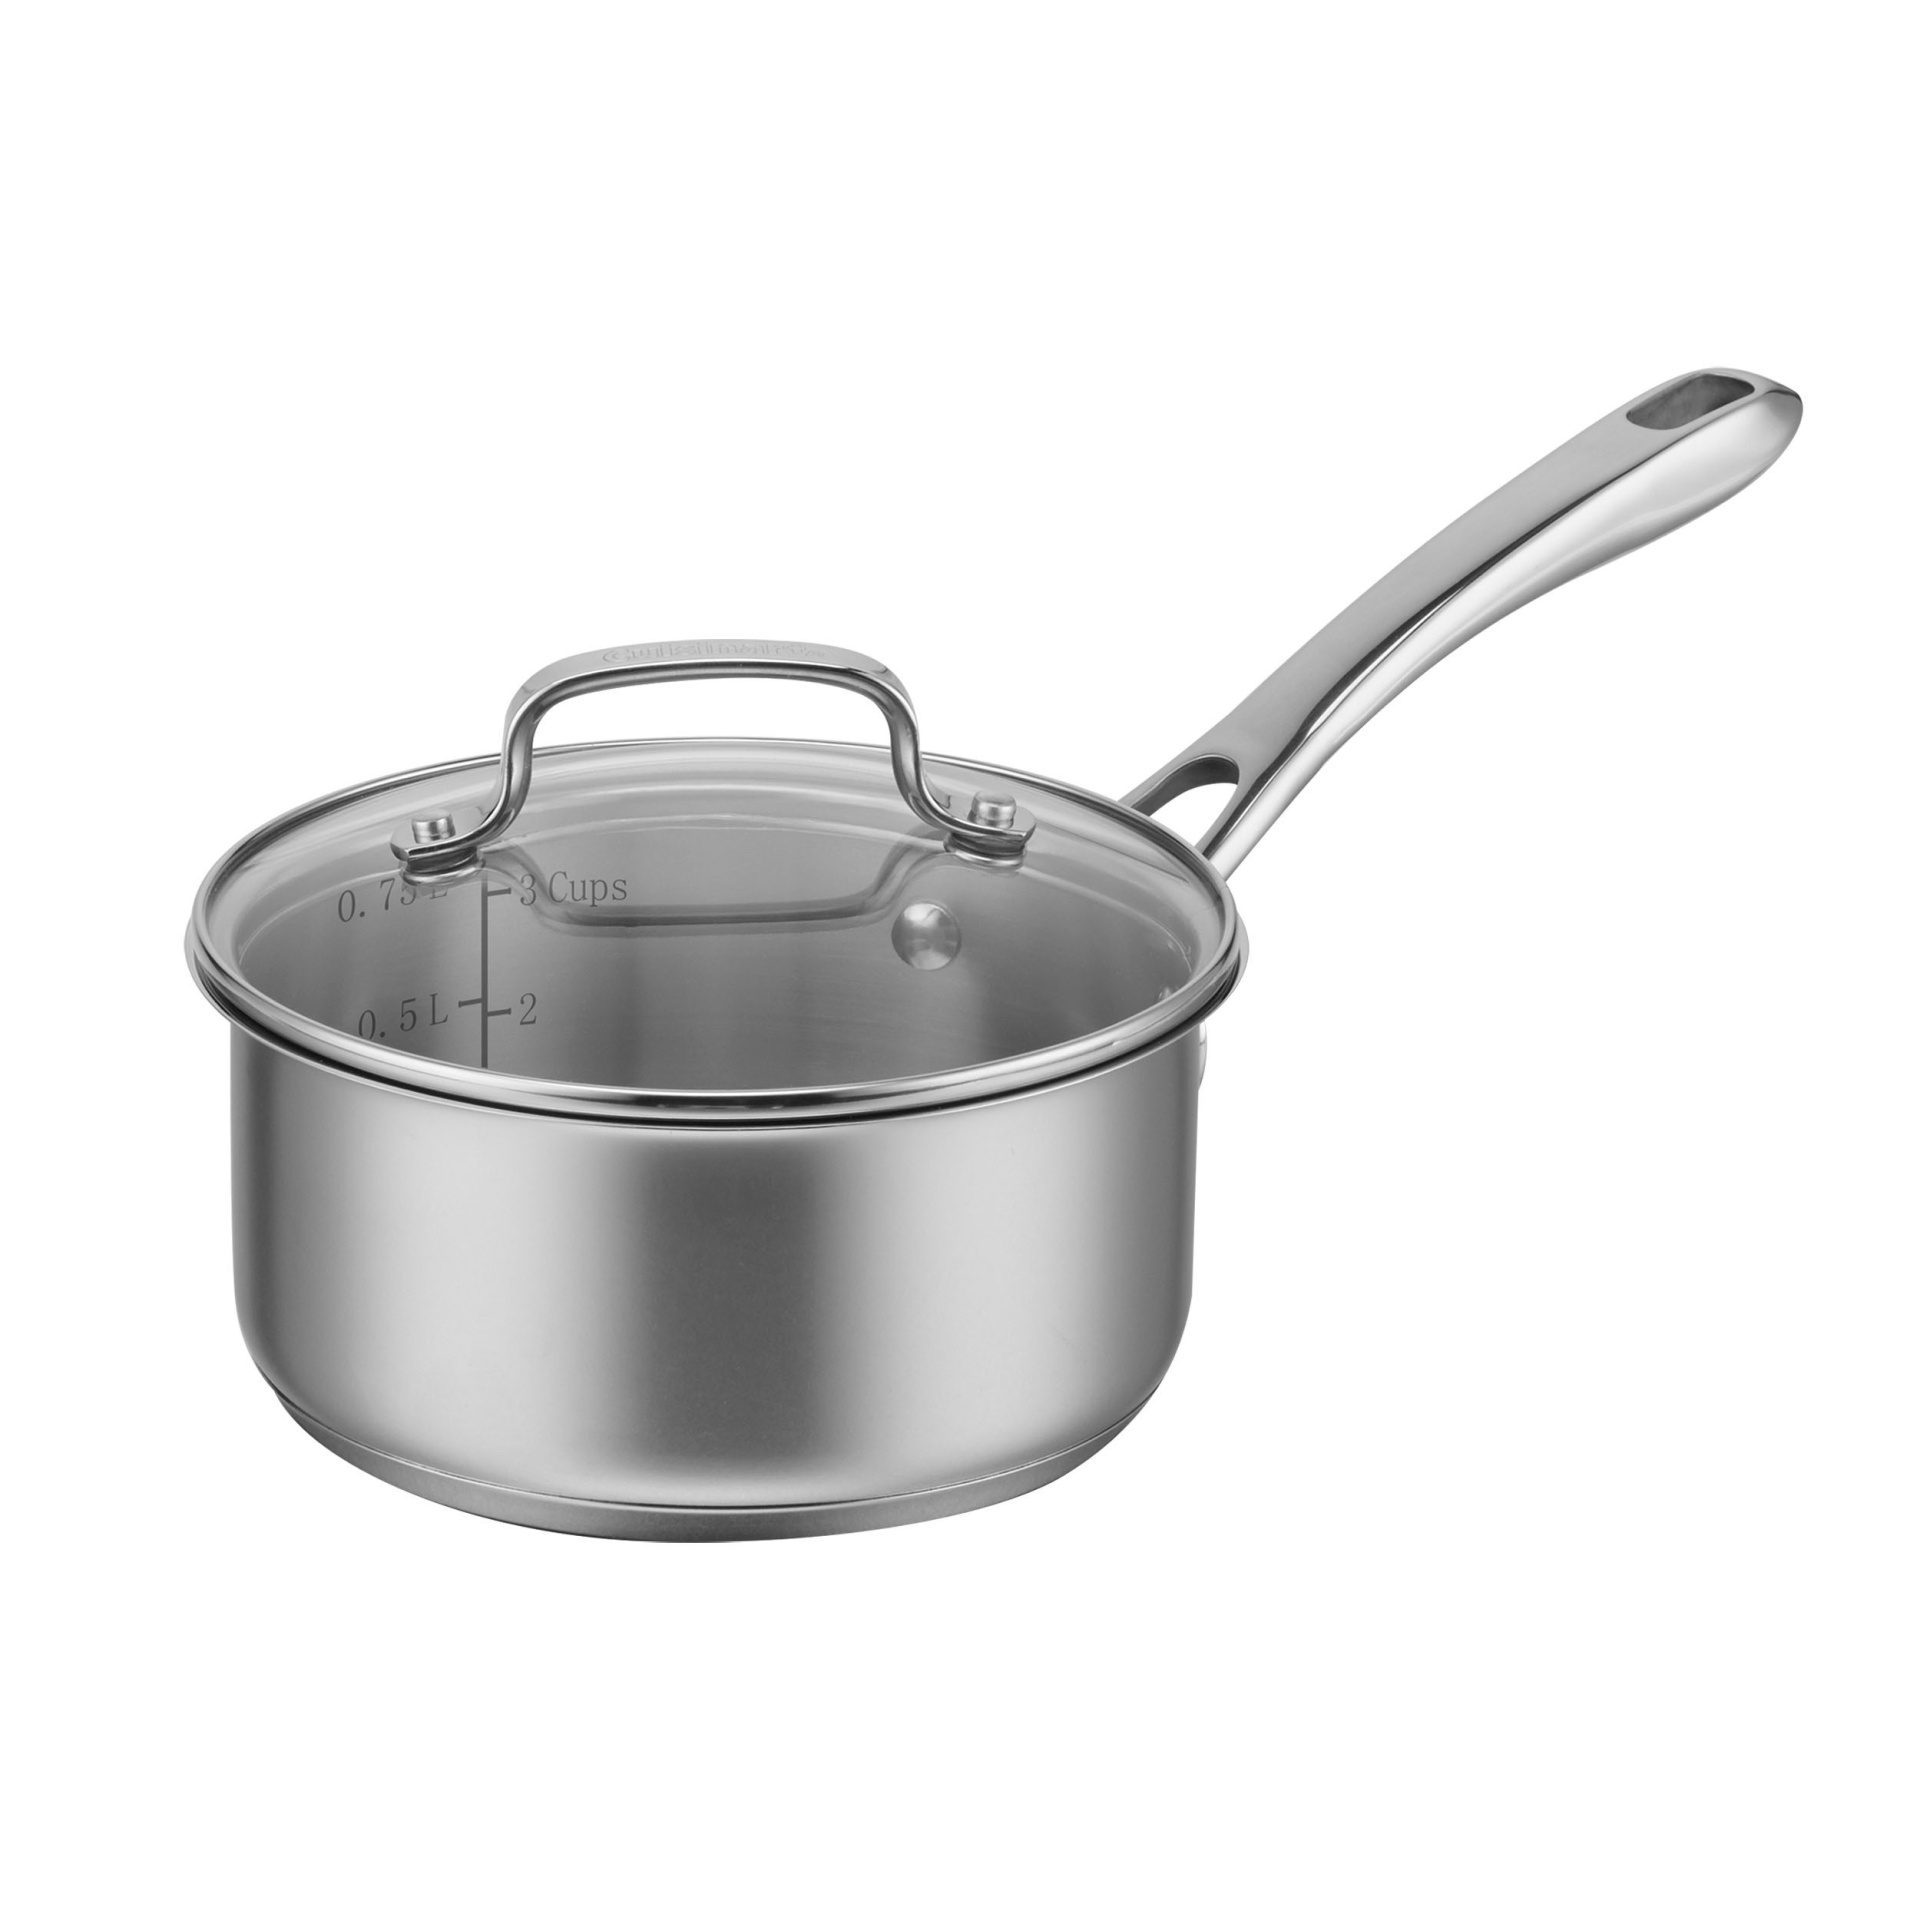 slide 1 of 4, Cuisinart Classic 1qt Stainless Steel Saucepan with Cover - 8319-14, 1 qt